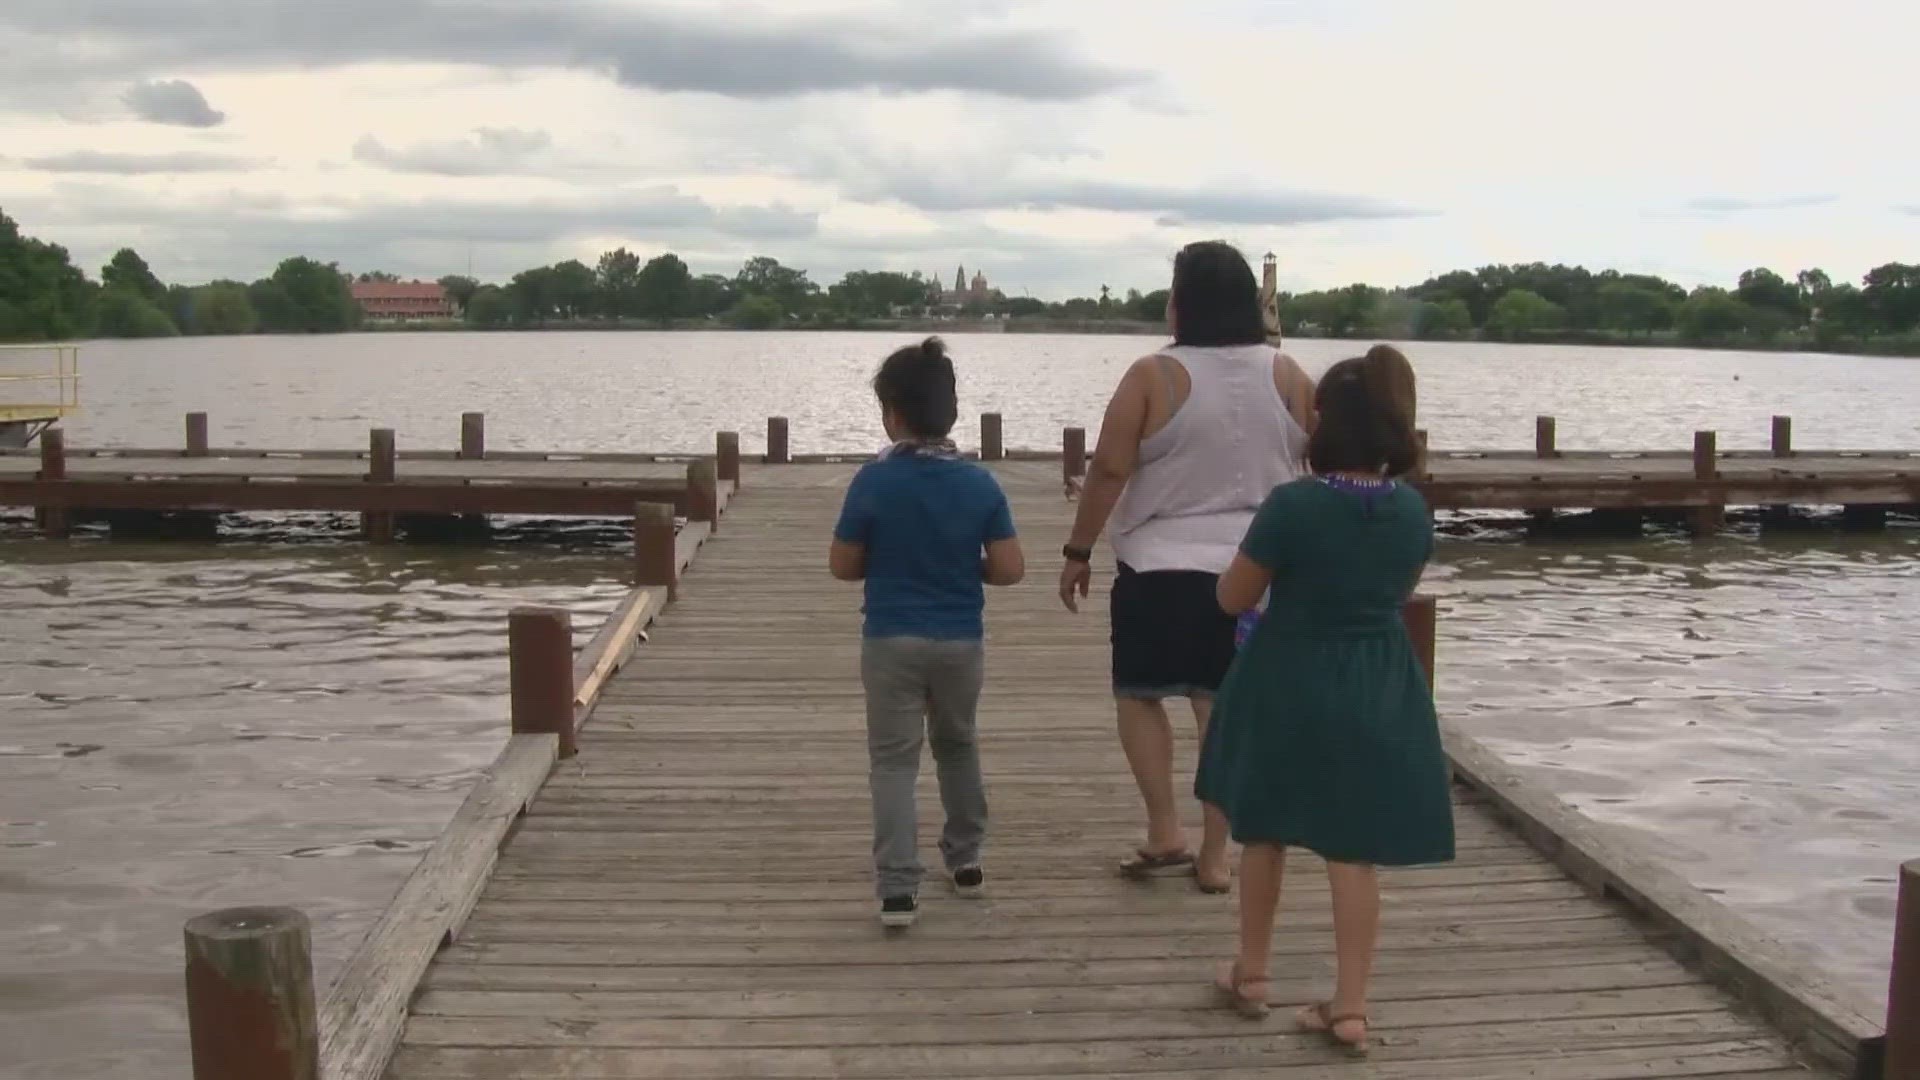 City Council approved applying for grant to fund improvements to Woodlawn Lake Park